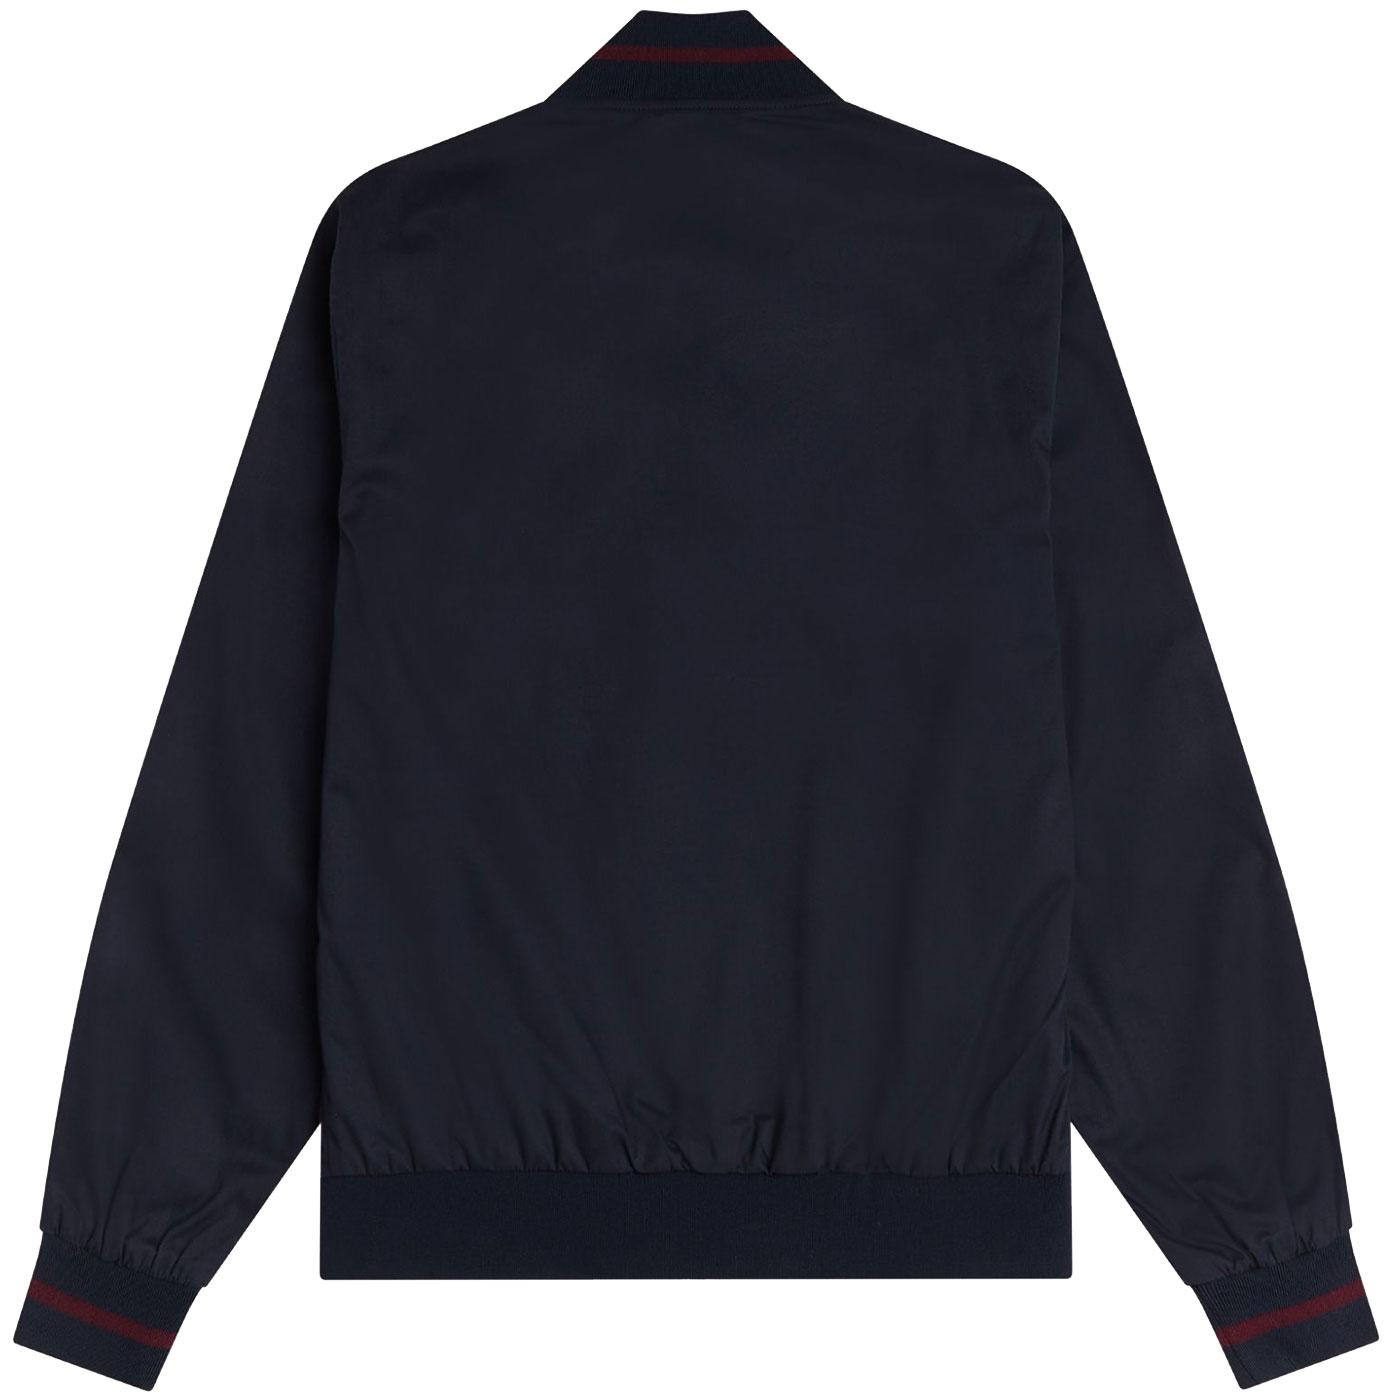 FRED PERRY Retro Mod Tennis Bomber Jacket in Navy